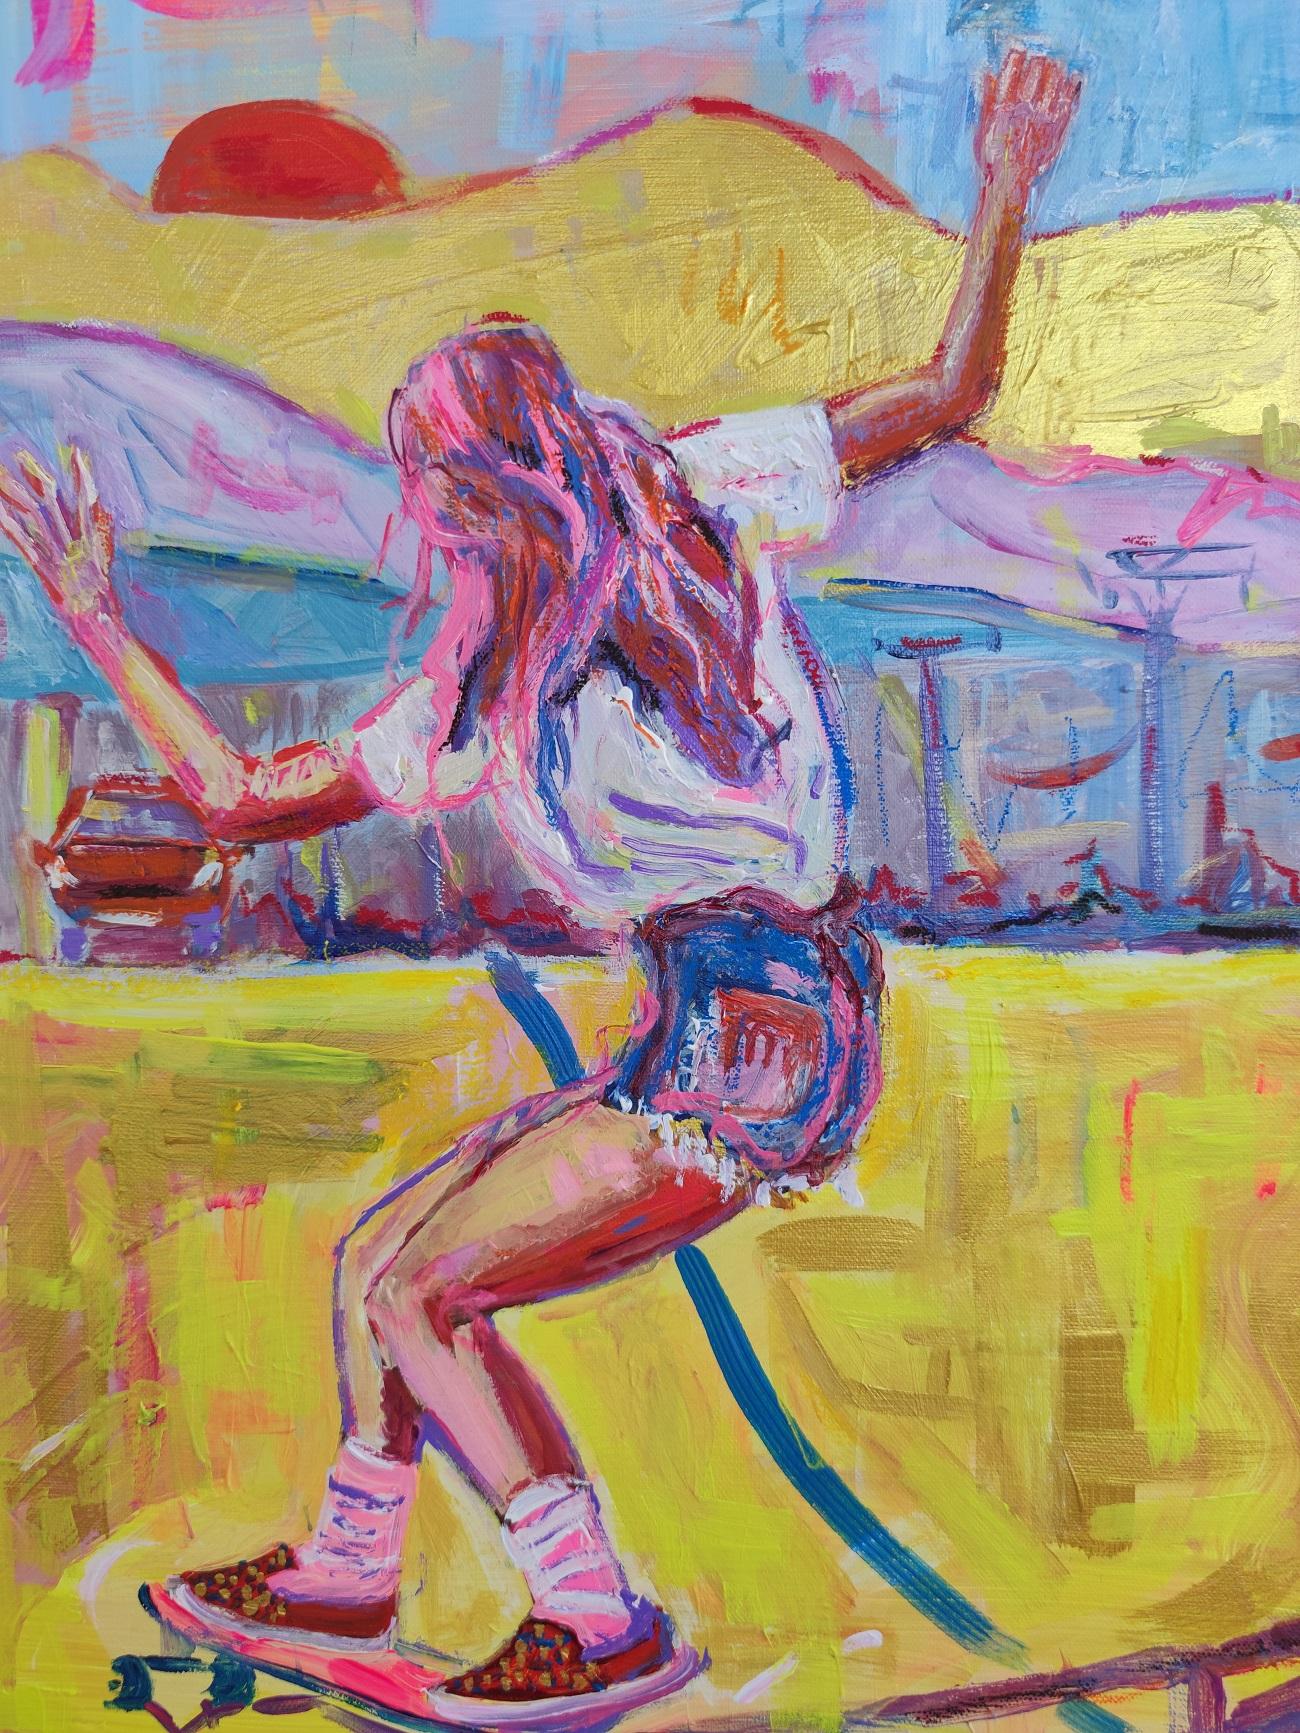 
This painting is from the series La Dolce vita. It is done with acrylic paint alla prima on a cotton canvas. The painting is inspired by the Californian skate and rollerblading culture of the 70s.

Linda Clerget focuses on the exploration of colors